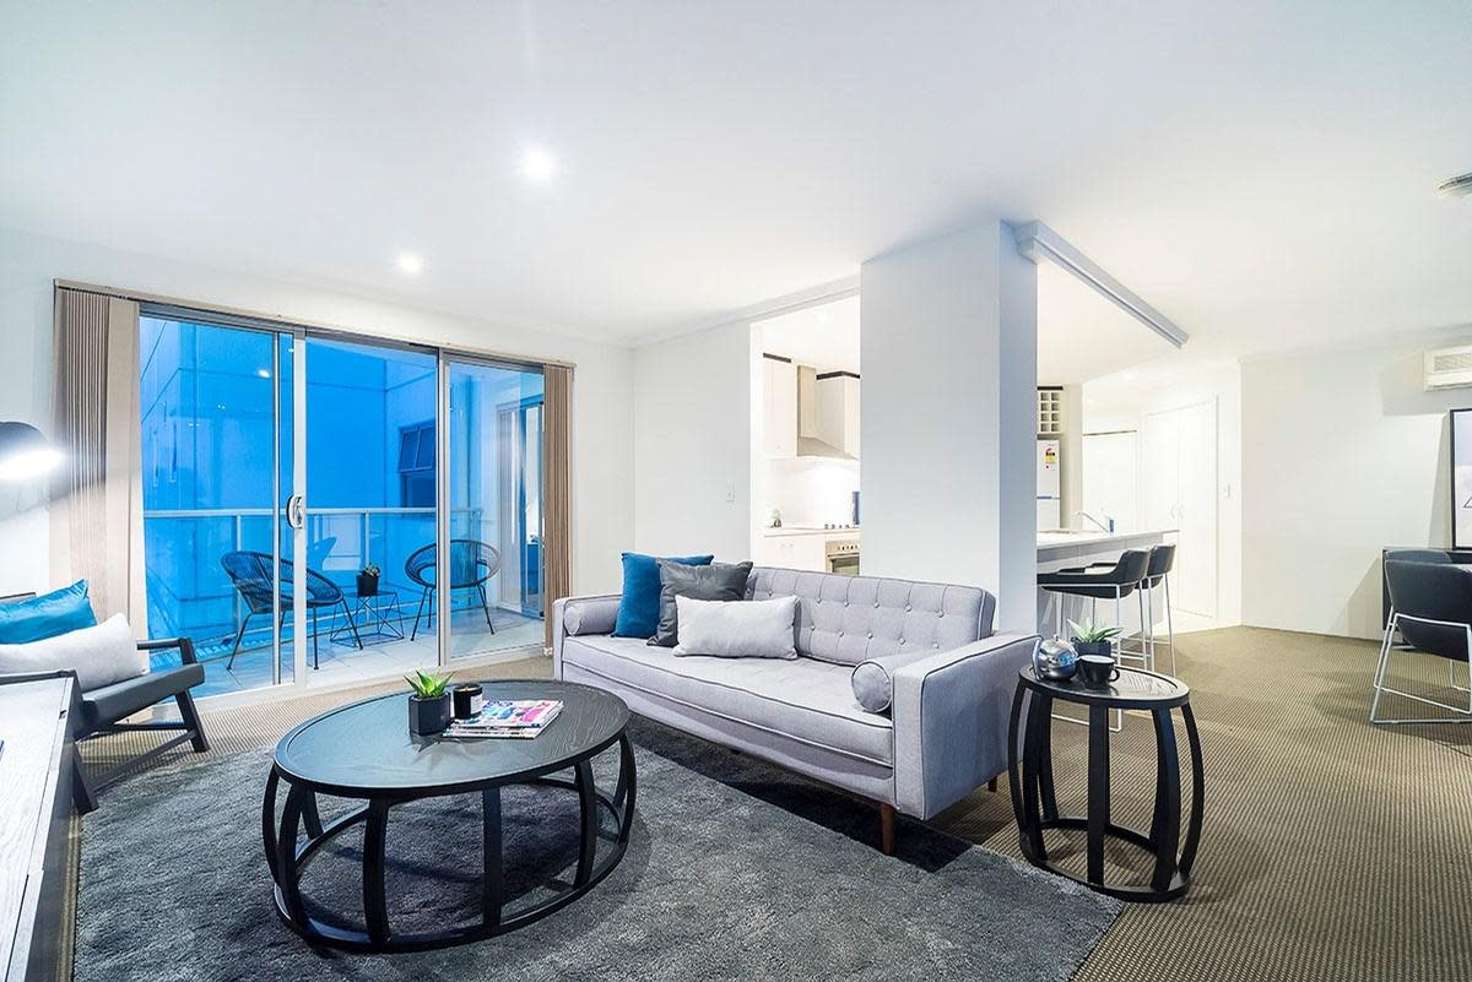 Main view of Homely apartment listing, 5/138 Mounts Bay Road, Perth WA 6000